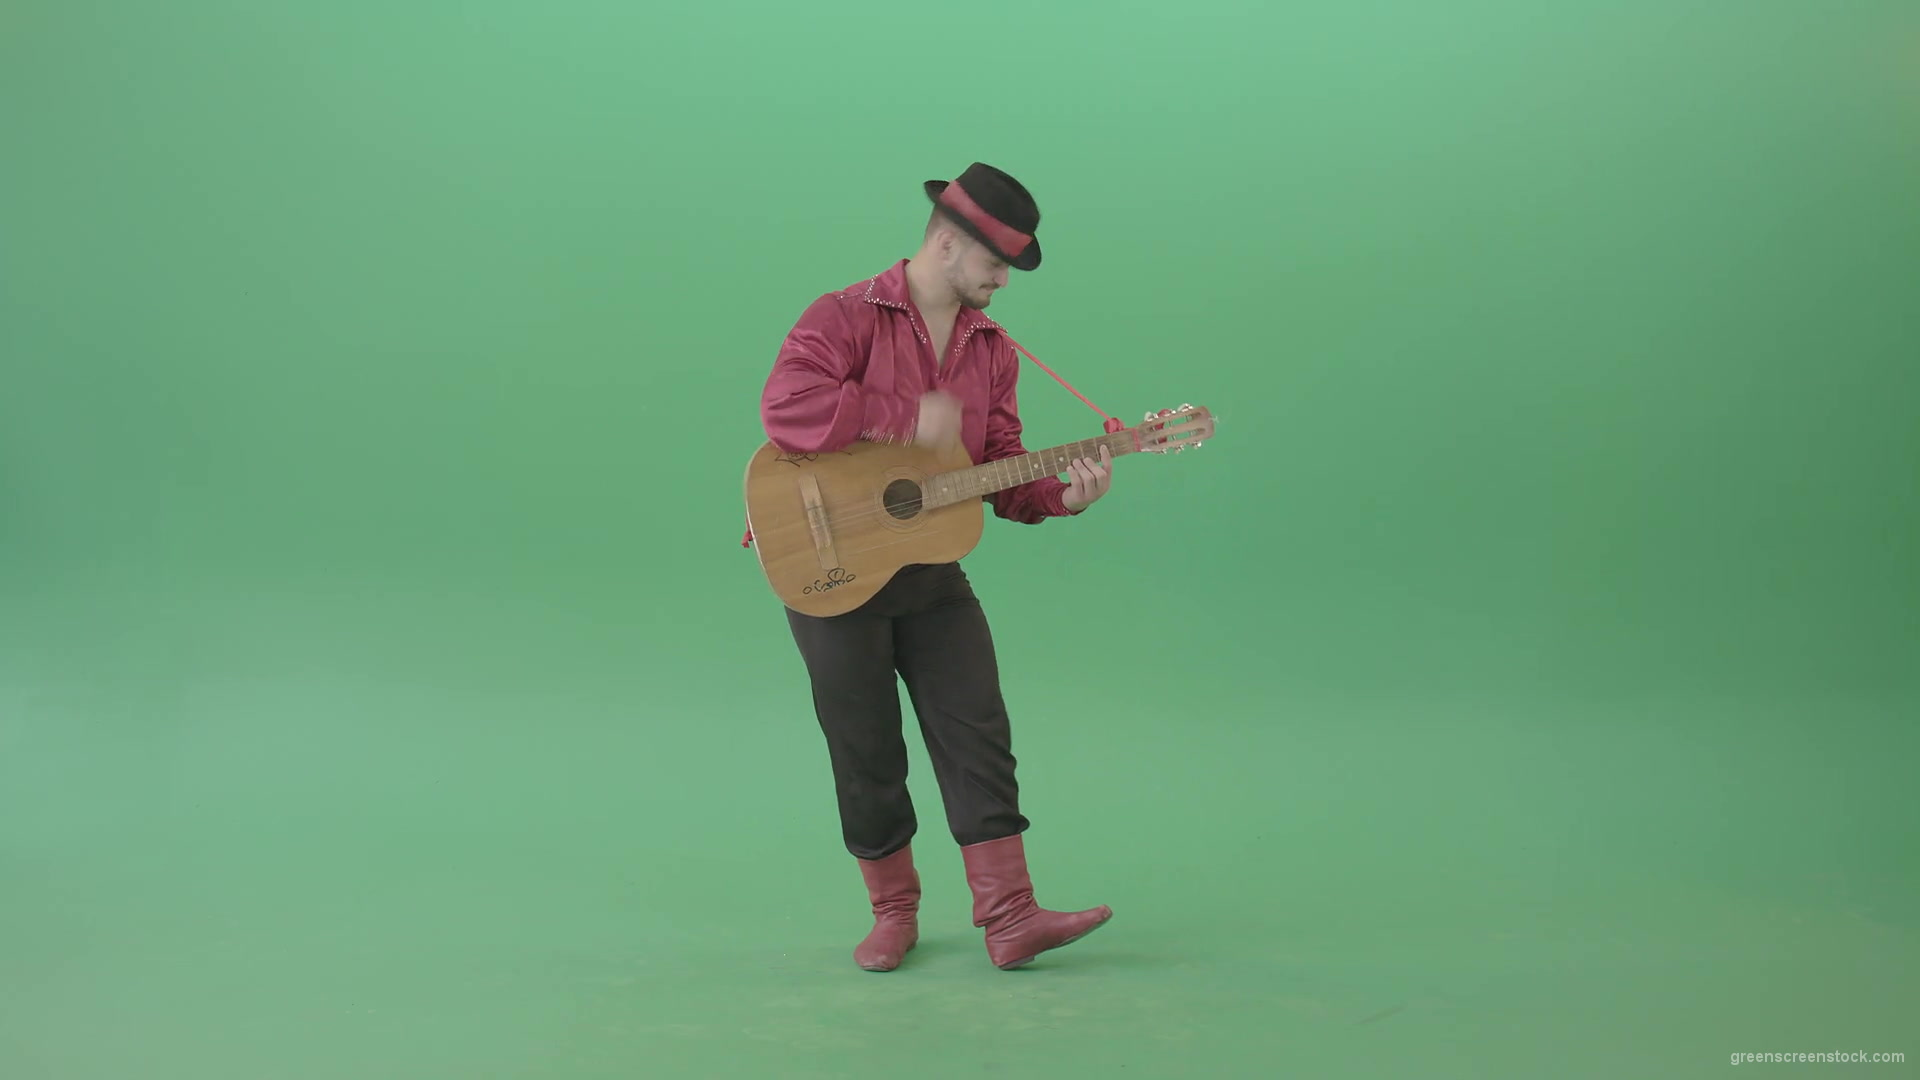 Balkan-Gipsy-man-in-red-shirt-playing-guitar-isolated-on-green-screen-4K-Video-Footage-1920_008 Green Screen Stock